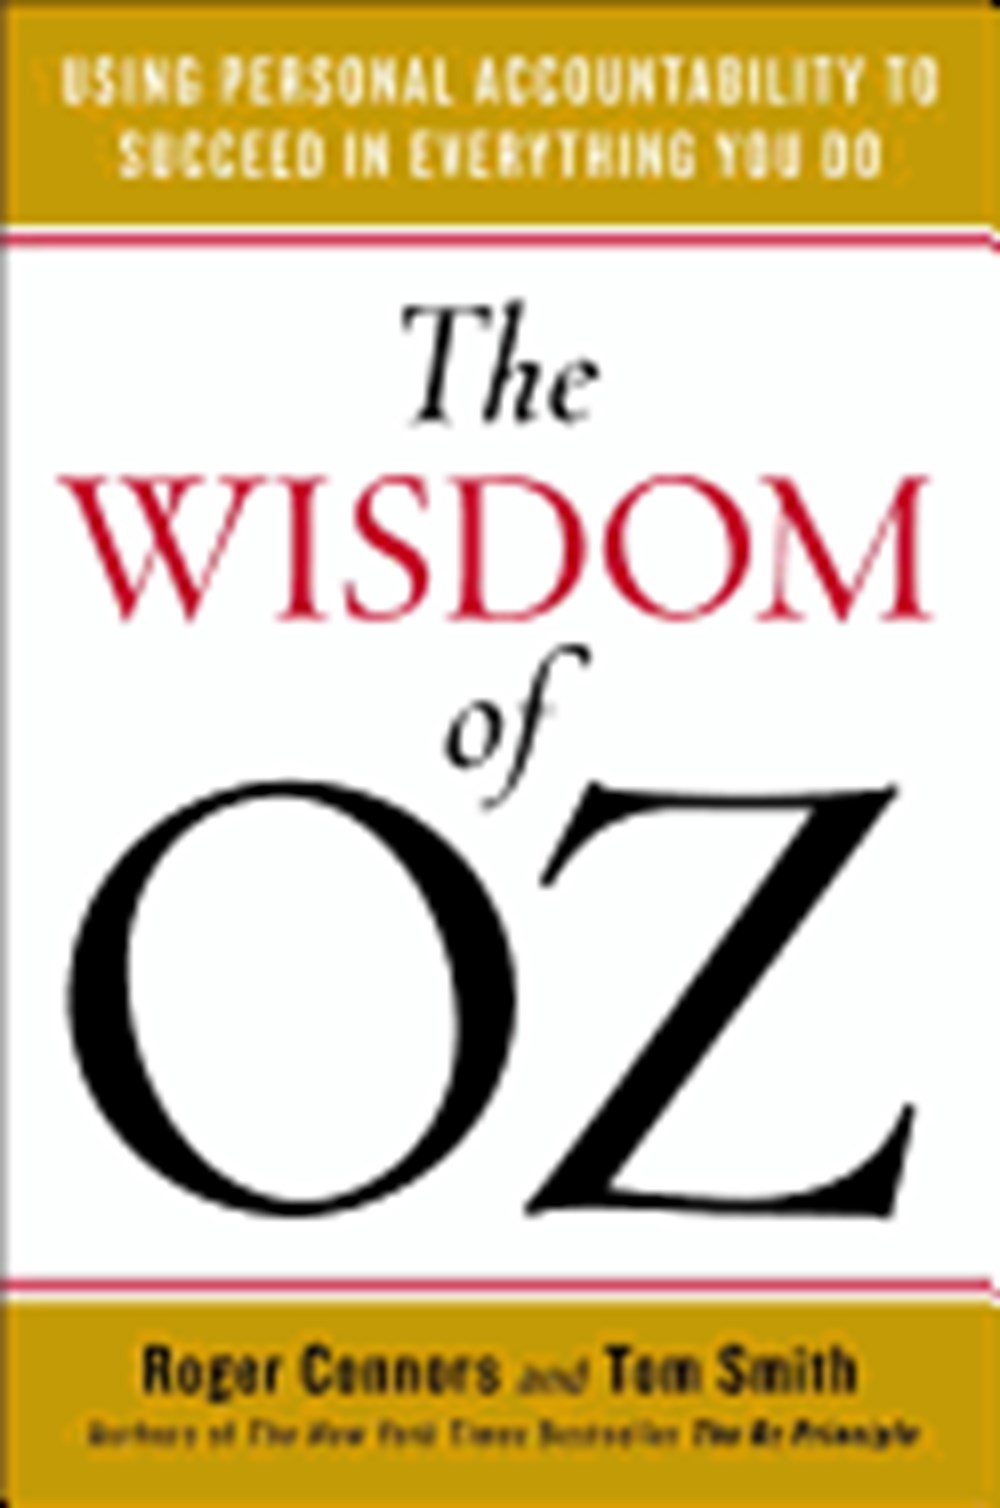 Wisdom of Oz: Using Personal Accountability to Succeed in Everything You Do